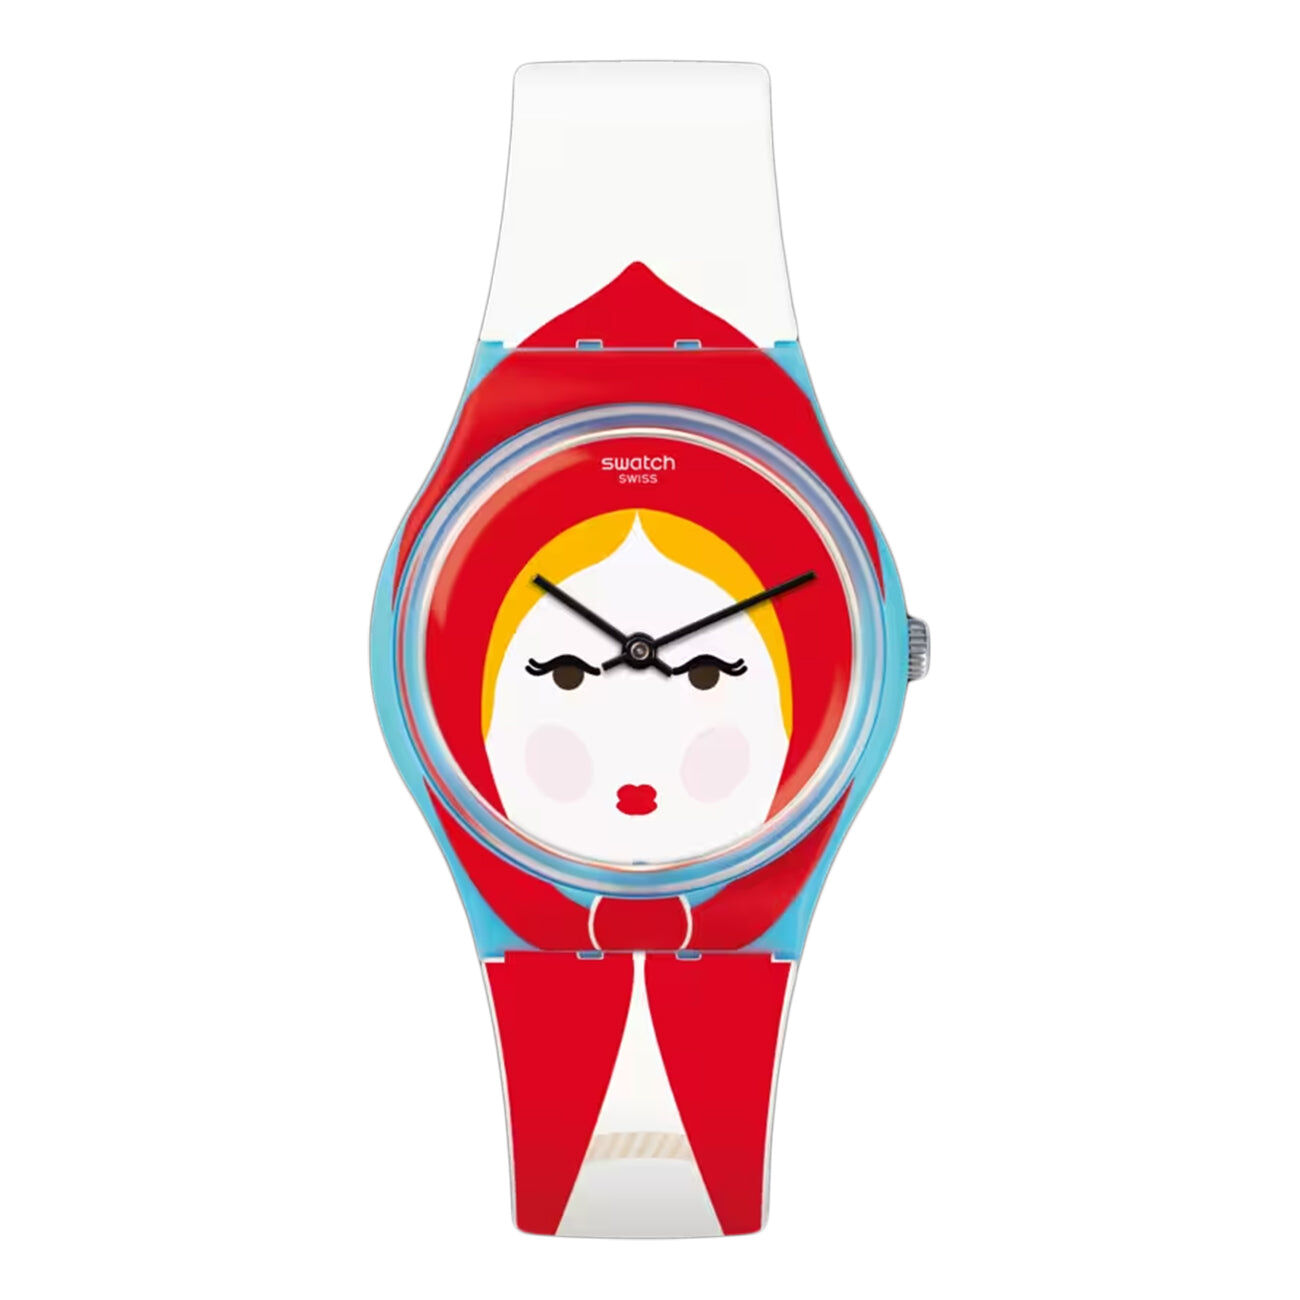 Swatch Women's Cappuccetto Multicolor Dial Watch female